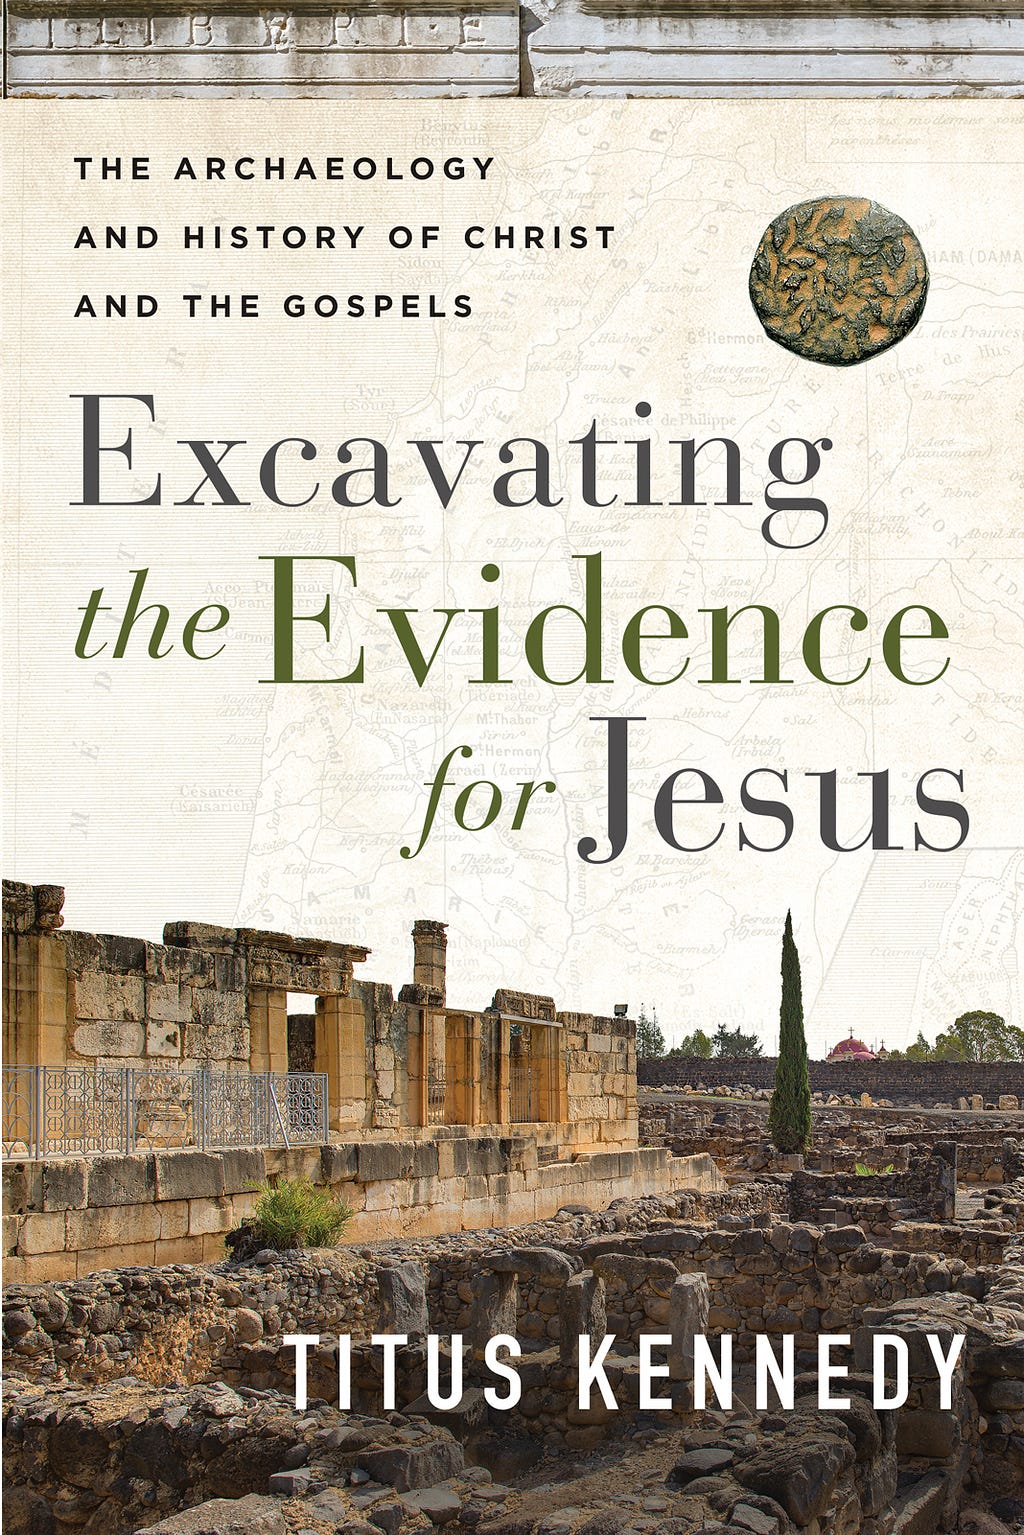 Excavating the Evidence for Jesus: The Archaeology and History of Christ and the Gospels PDF